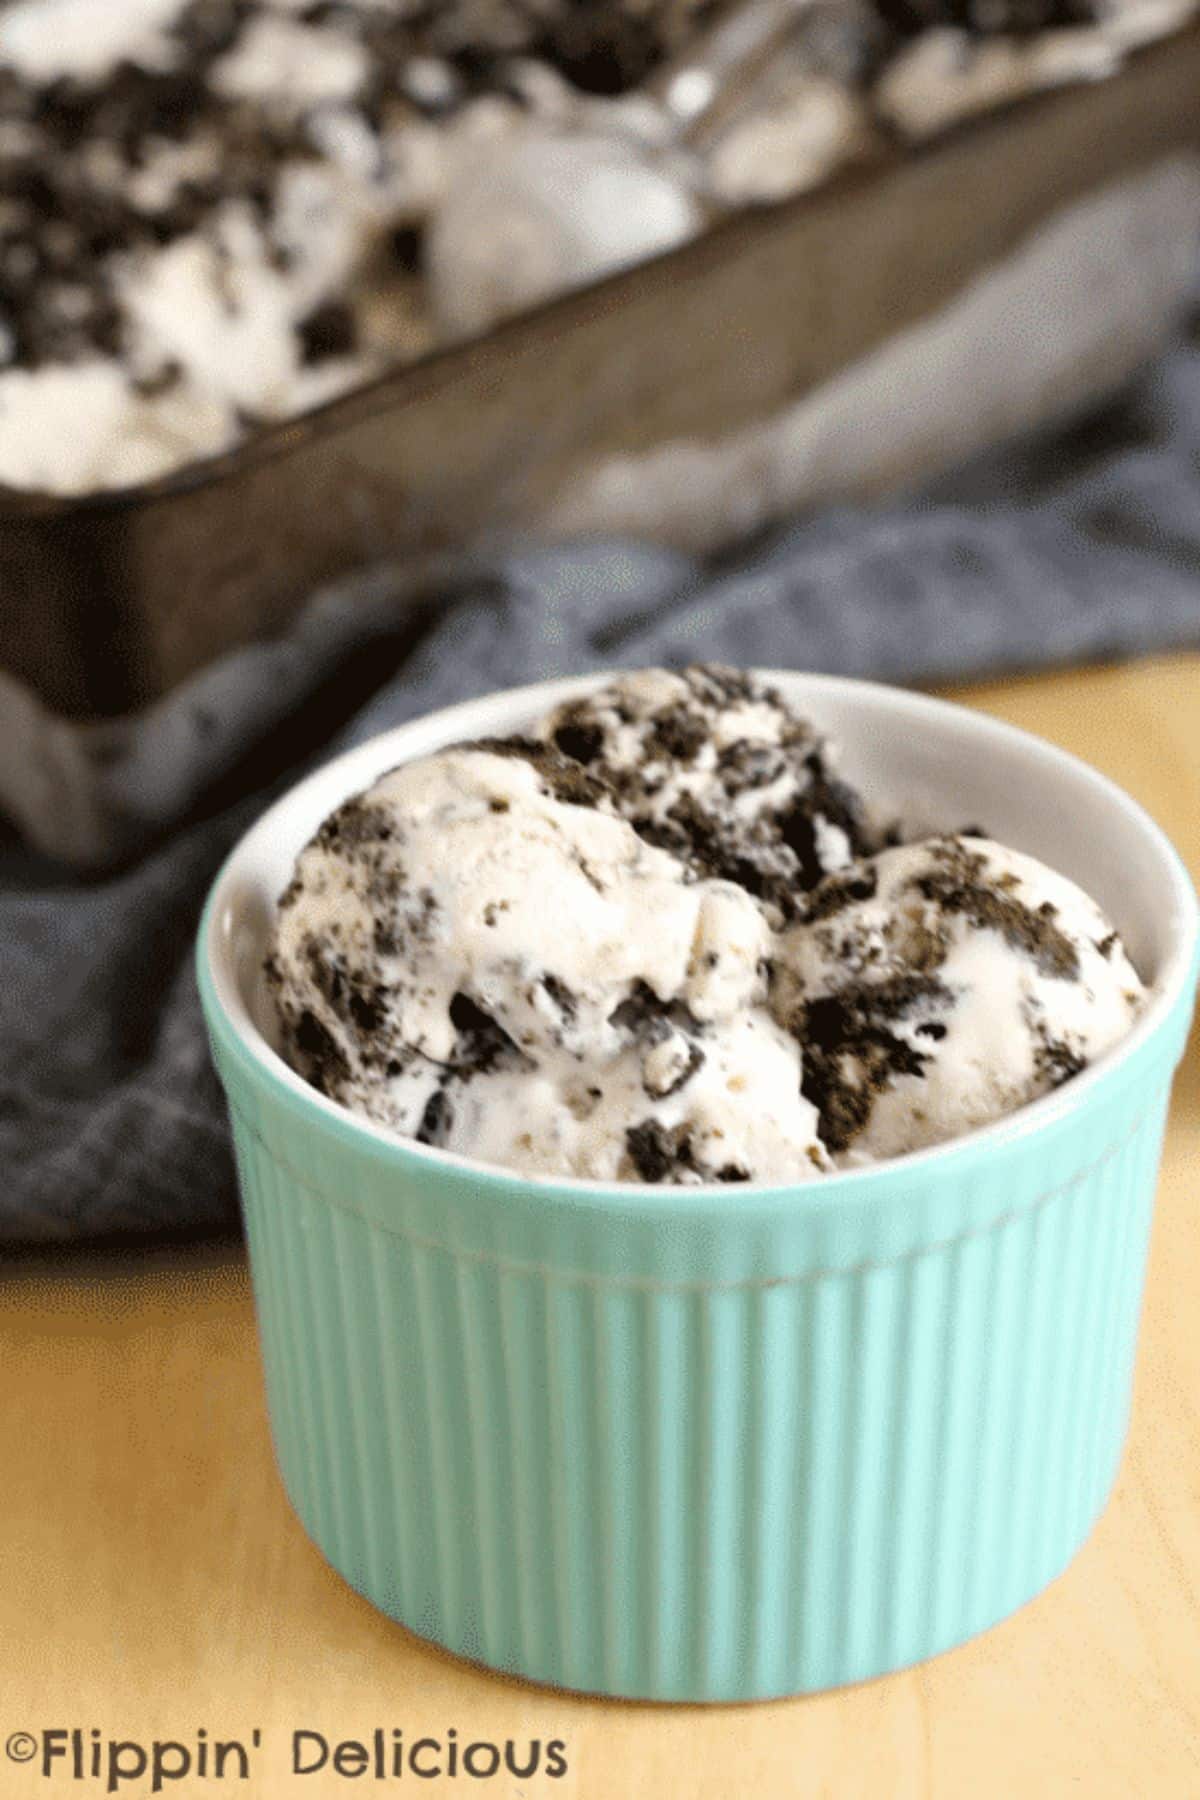 A bowl of Gluten-Free Cookies and Cream Ice Cream.